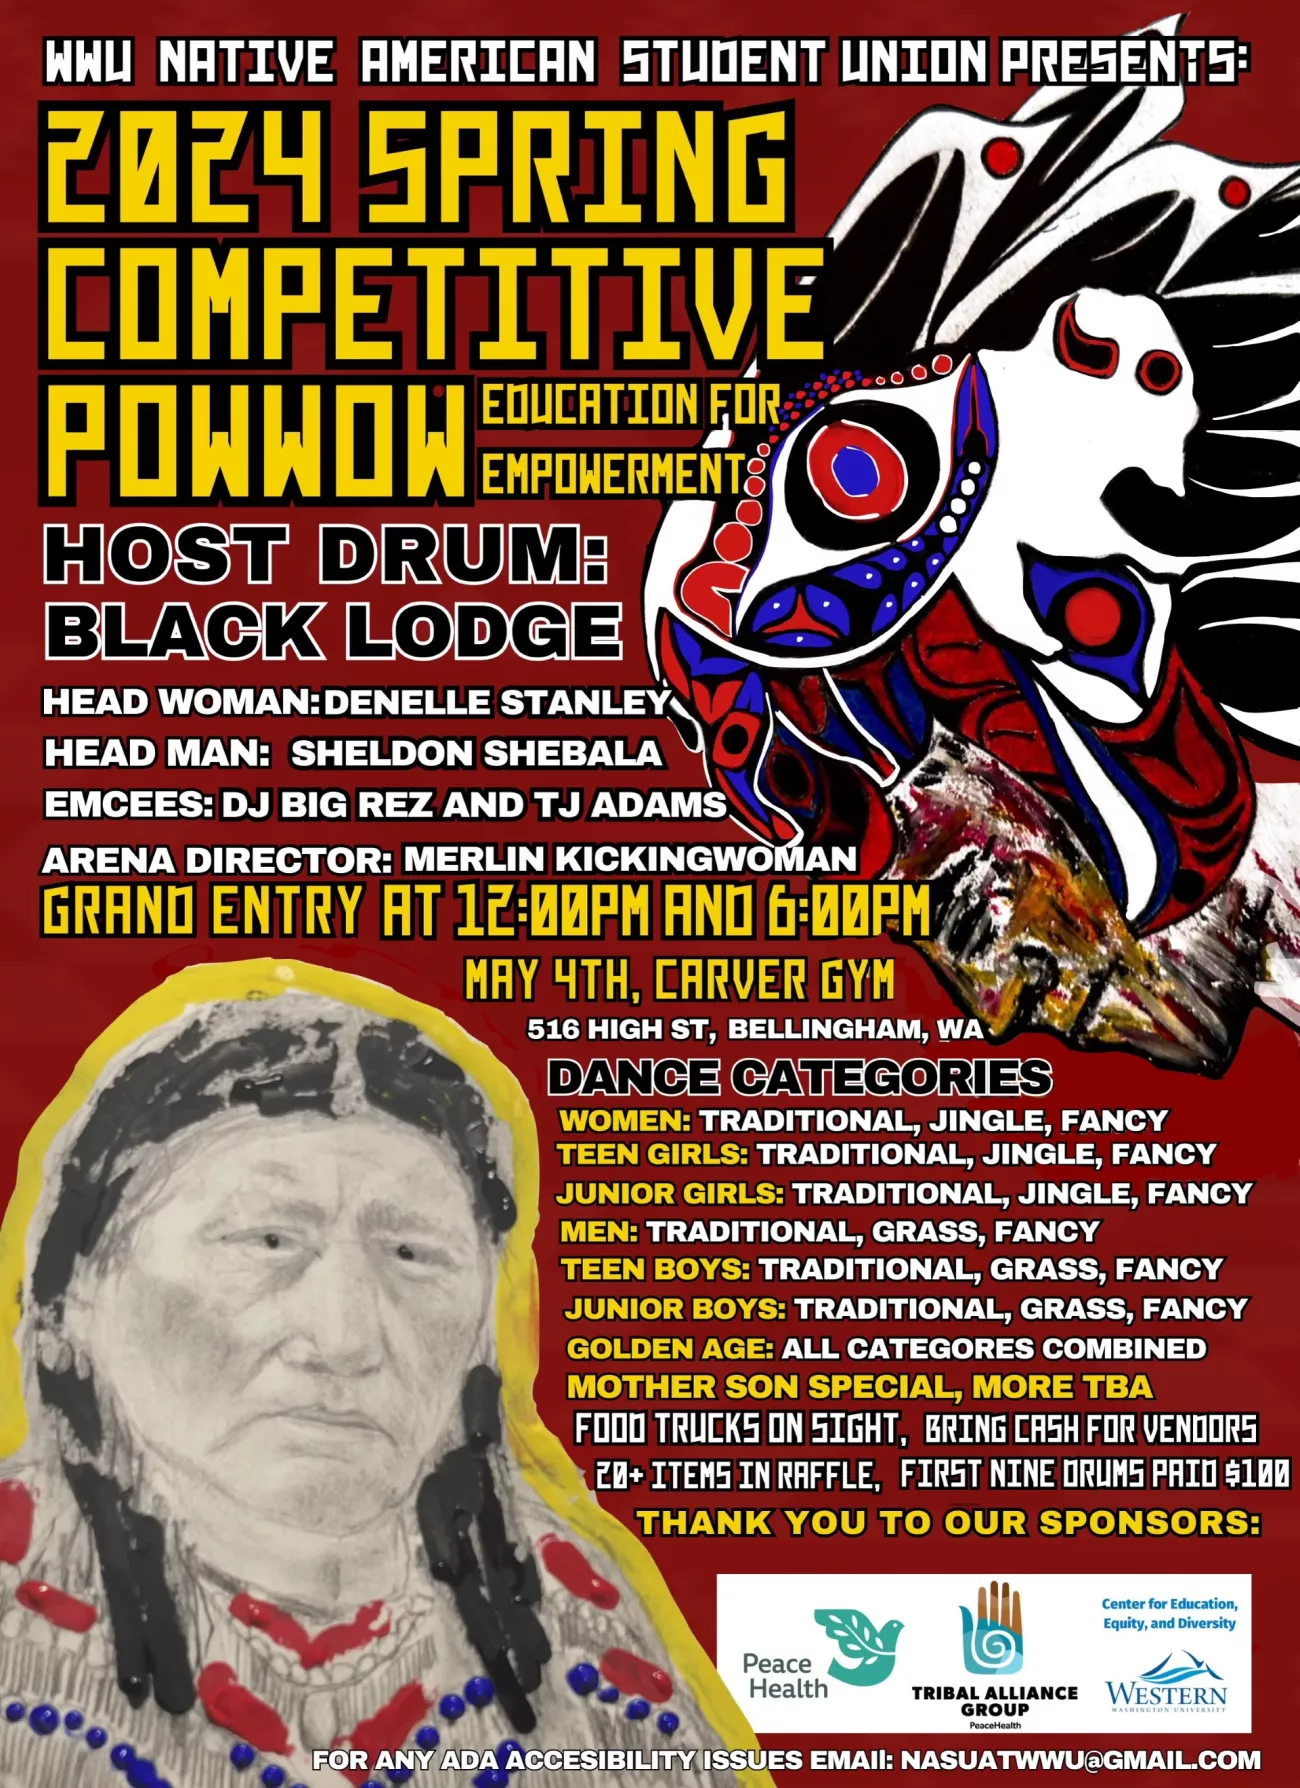 Powwow poster, with bold text and mixed media illustrations of two native Americans